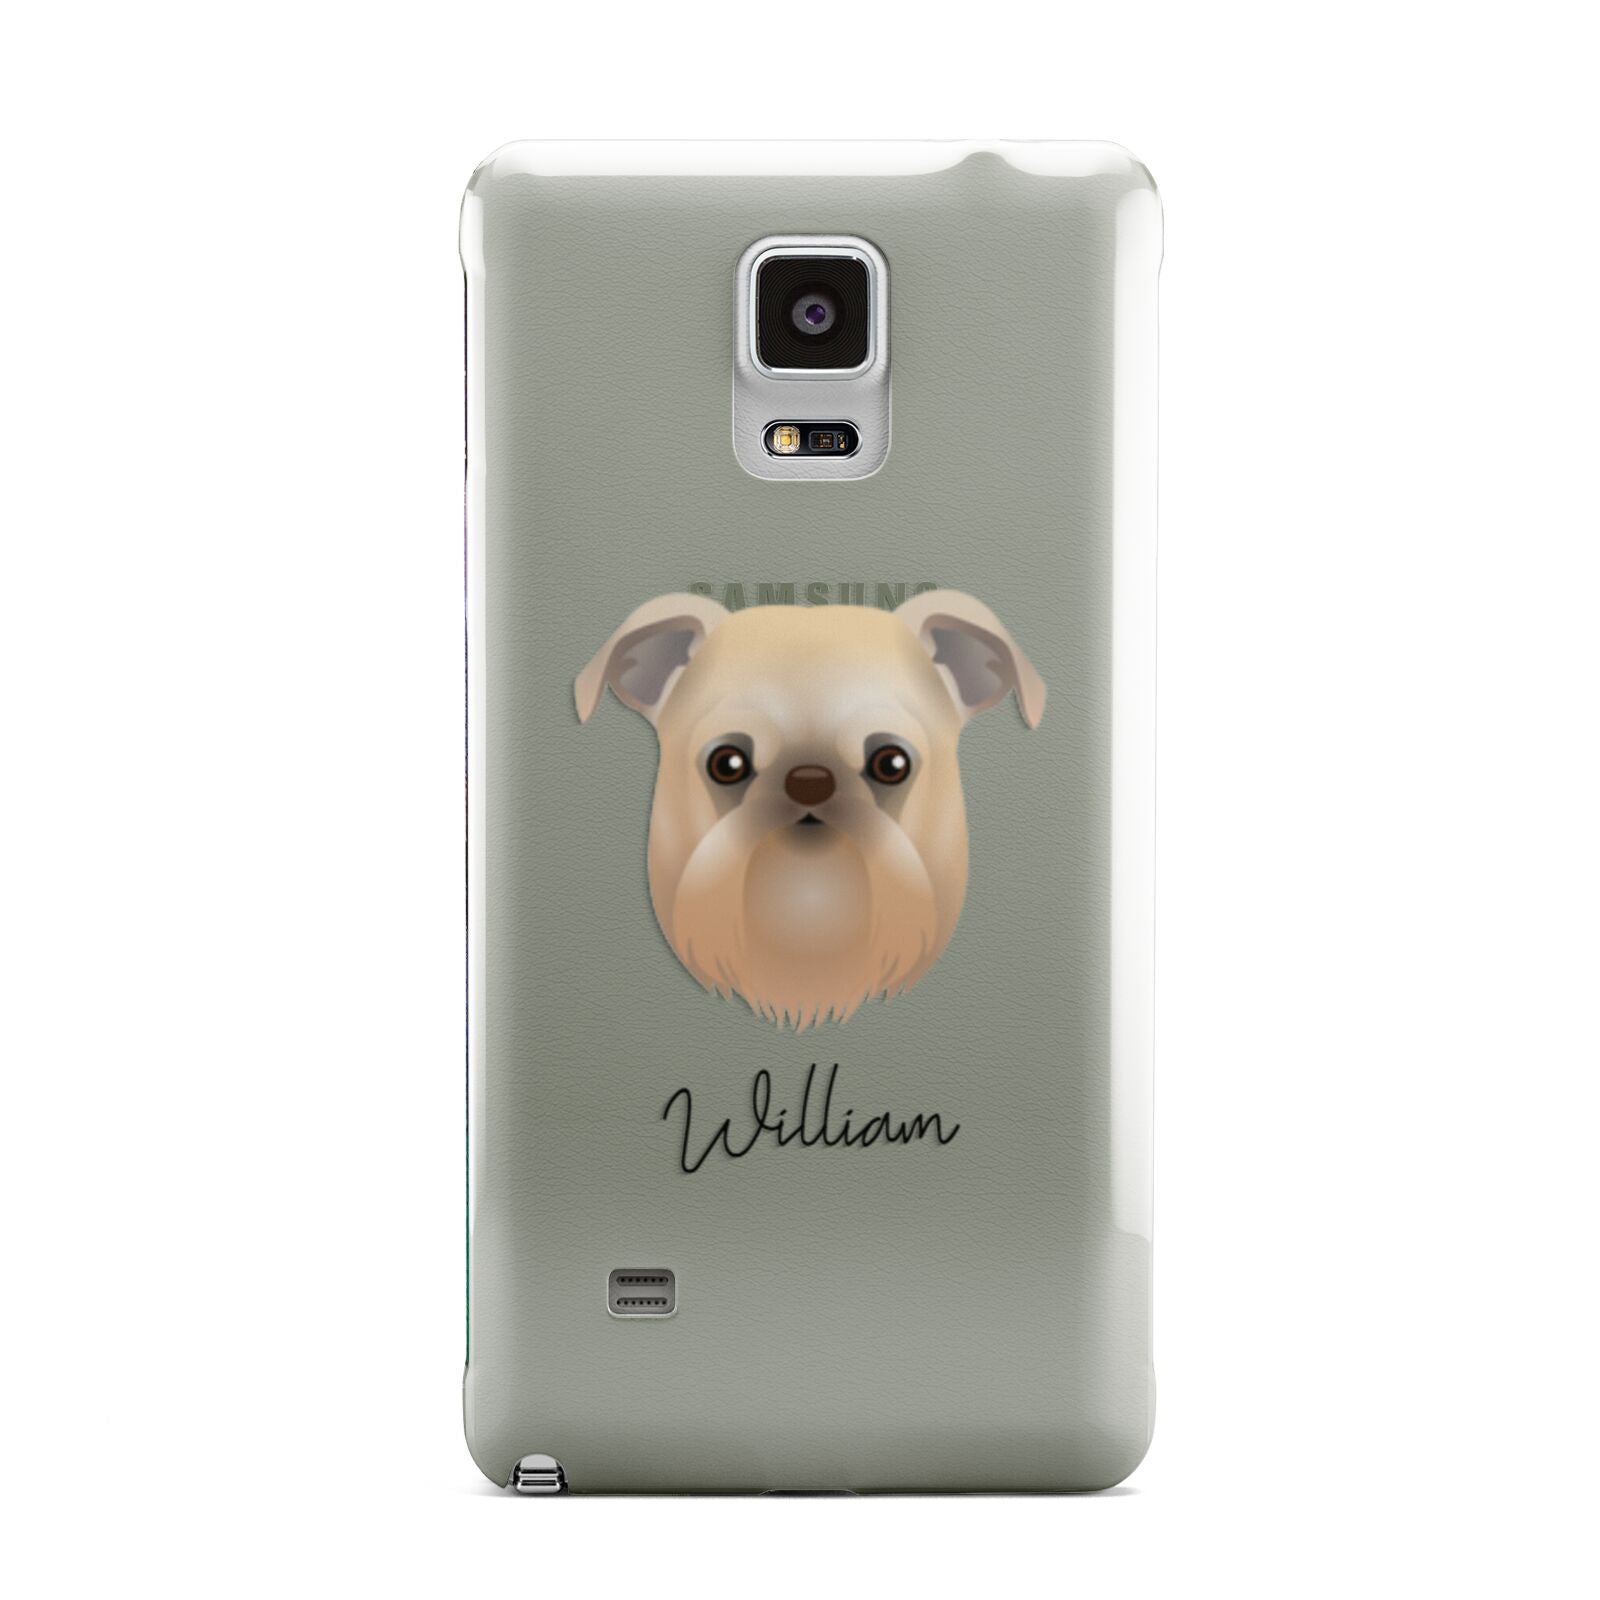 Griffon Bruxellois Personalised Samsung Galaxy Note 4 Case